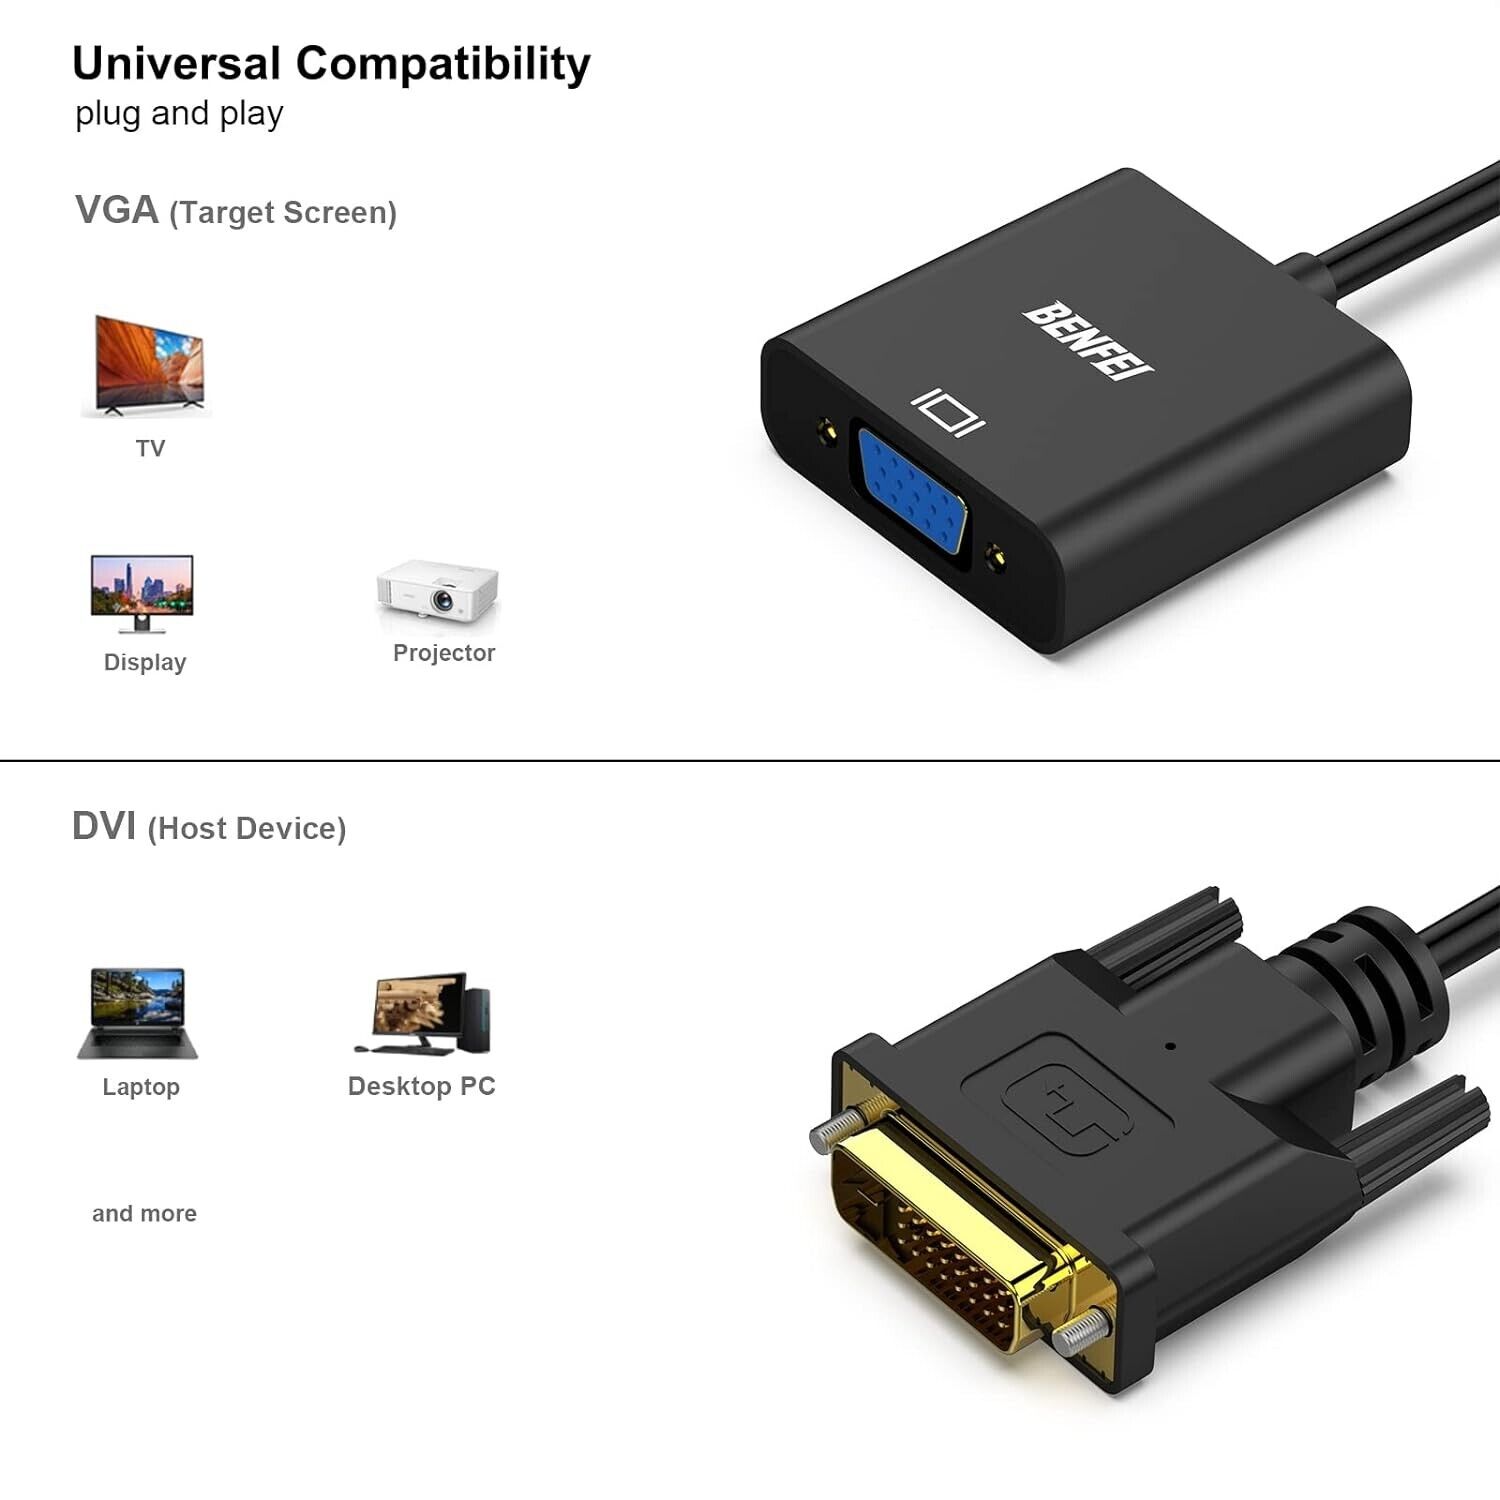 Premium Reliable DVI-D to VGA Adapter - High Performance, High Quality Video